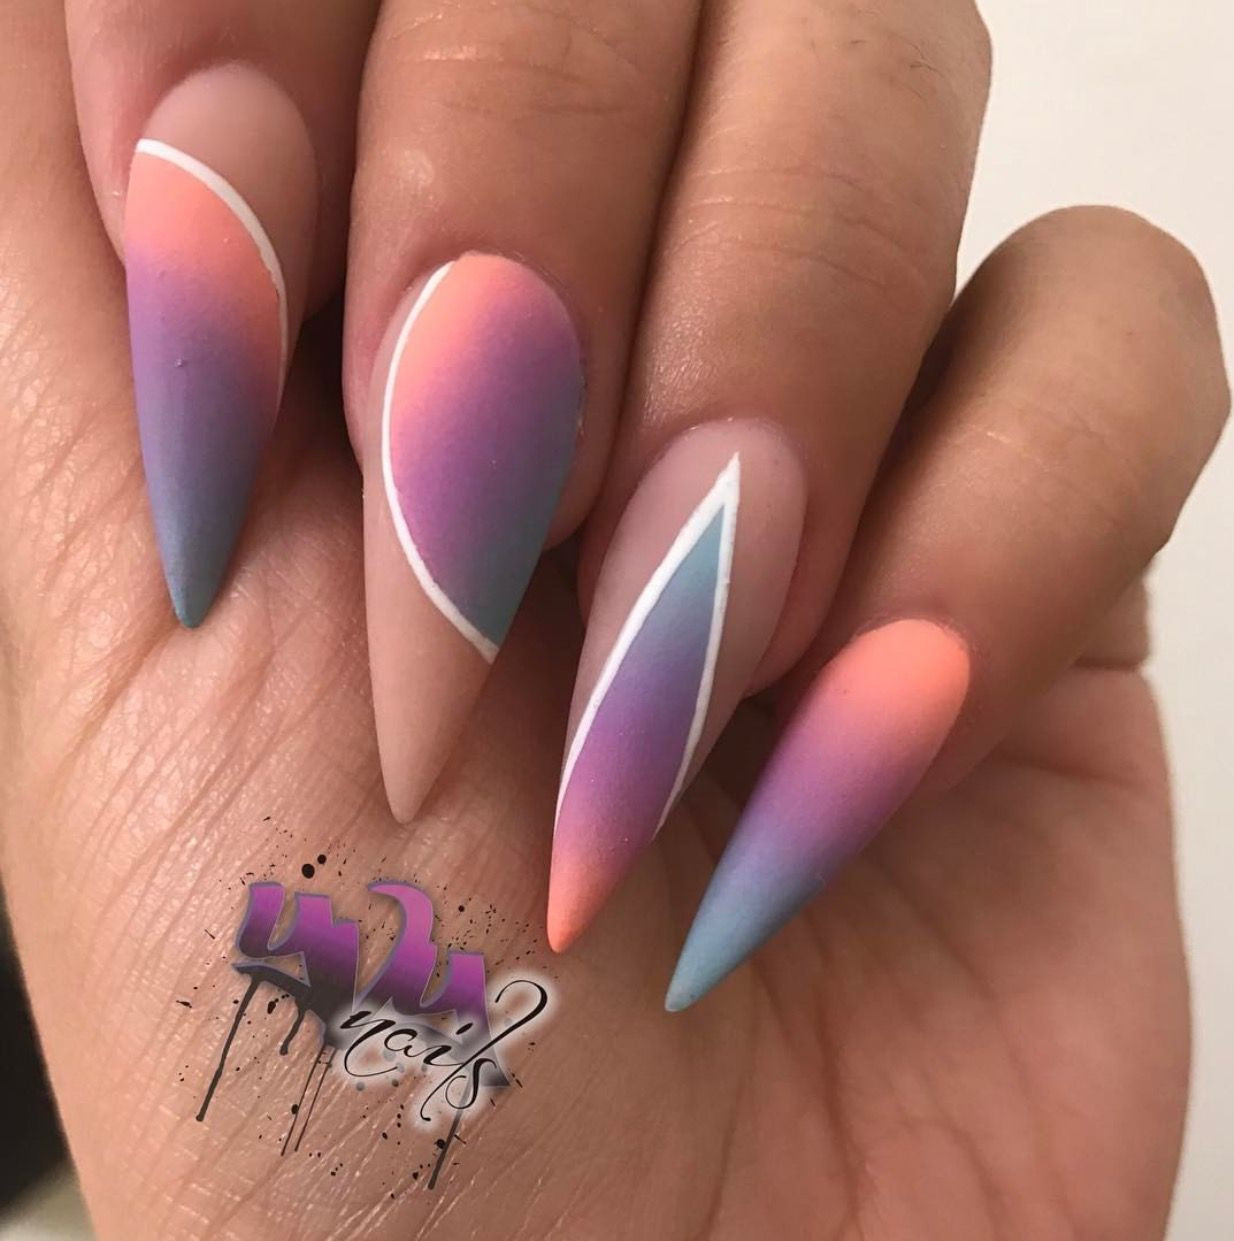 Nail Designs On Pinterest
 For More Follow QueeenLe Pinterest Instagram